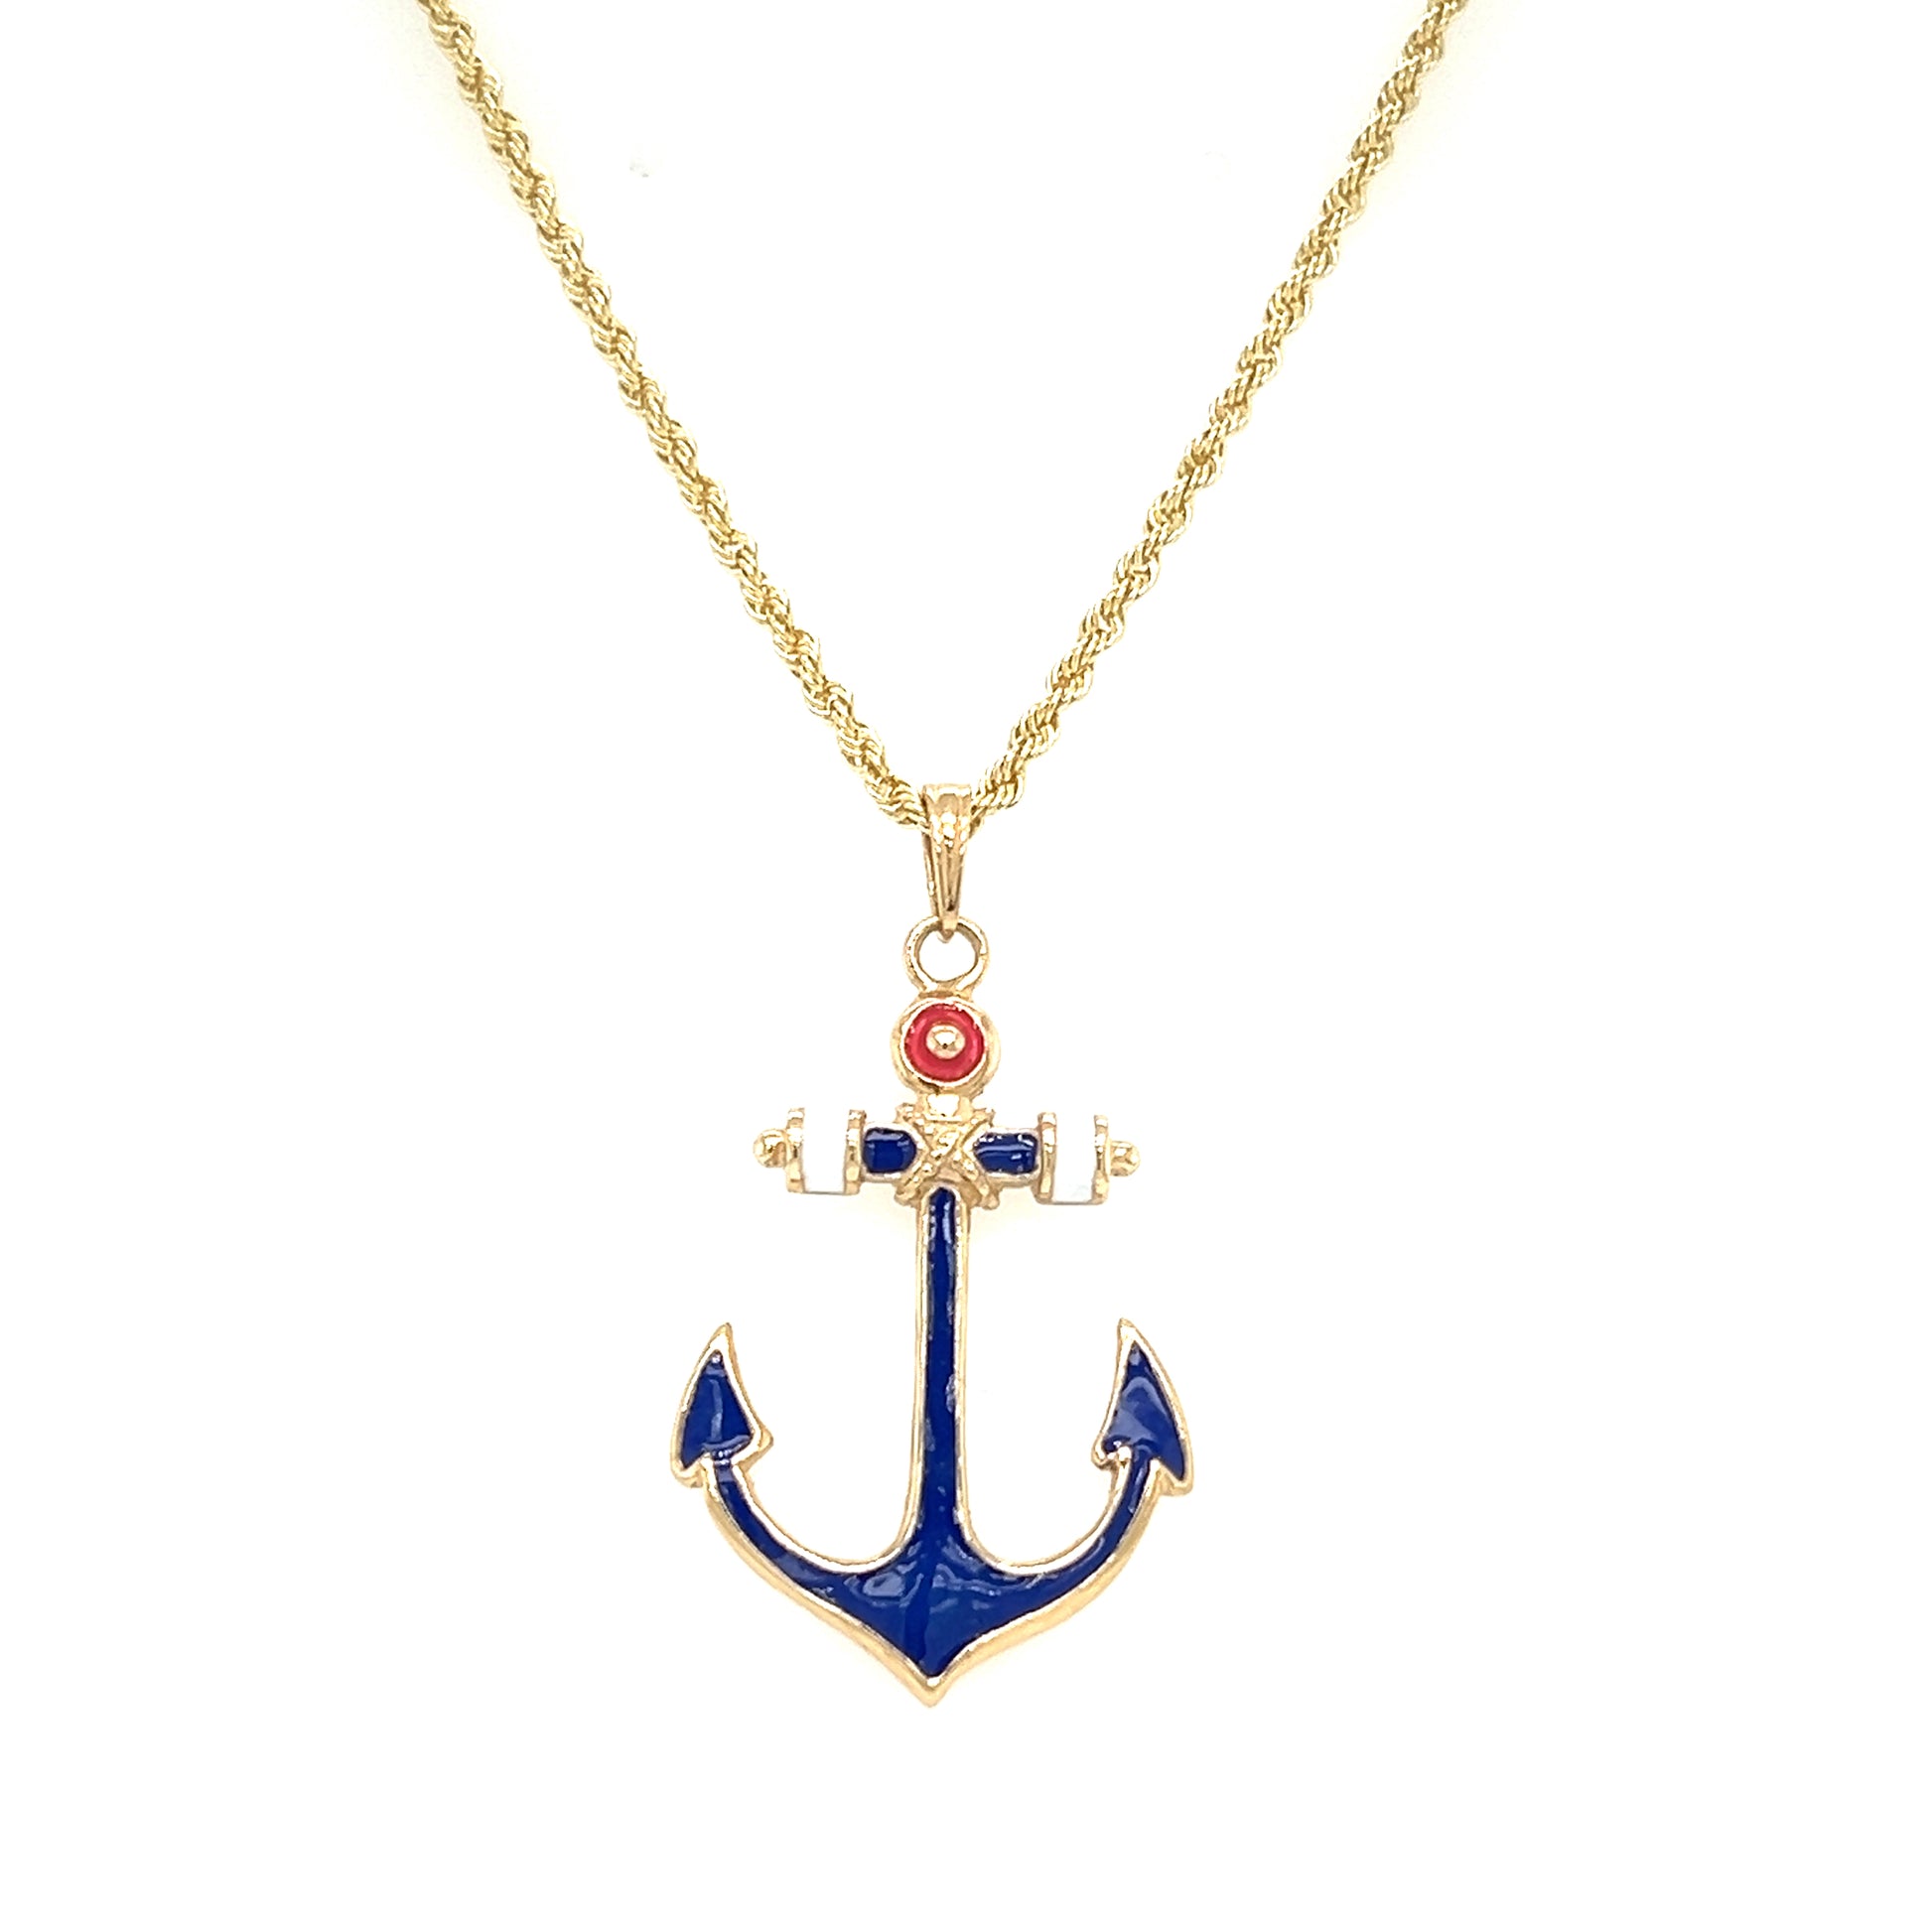 Anchor Pendant with Red White and Blue Enamel in 14K Yellow Gold Pendant on Chain Front View